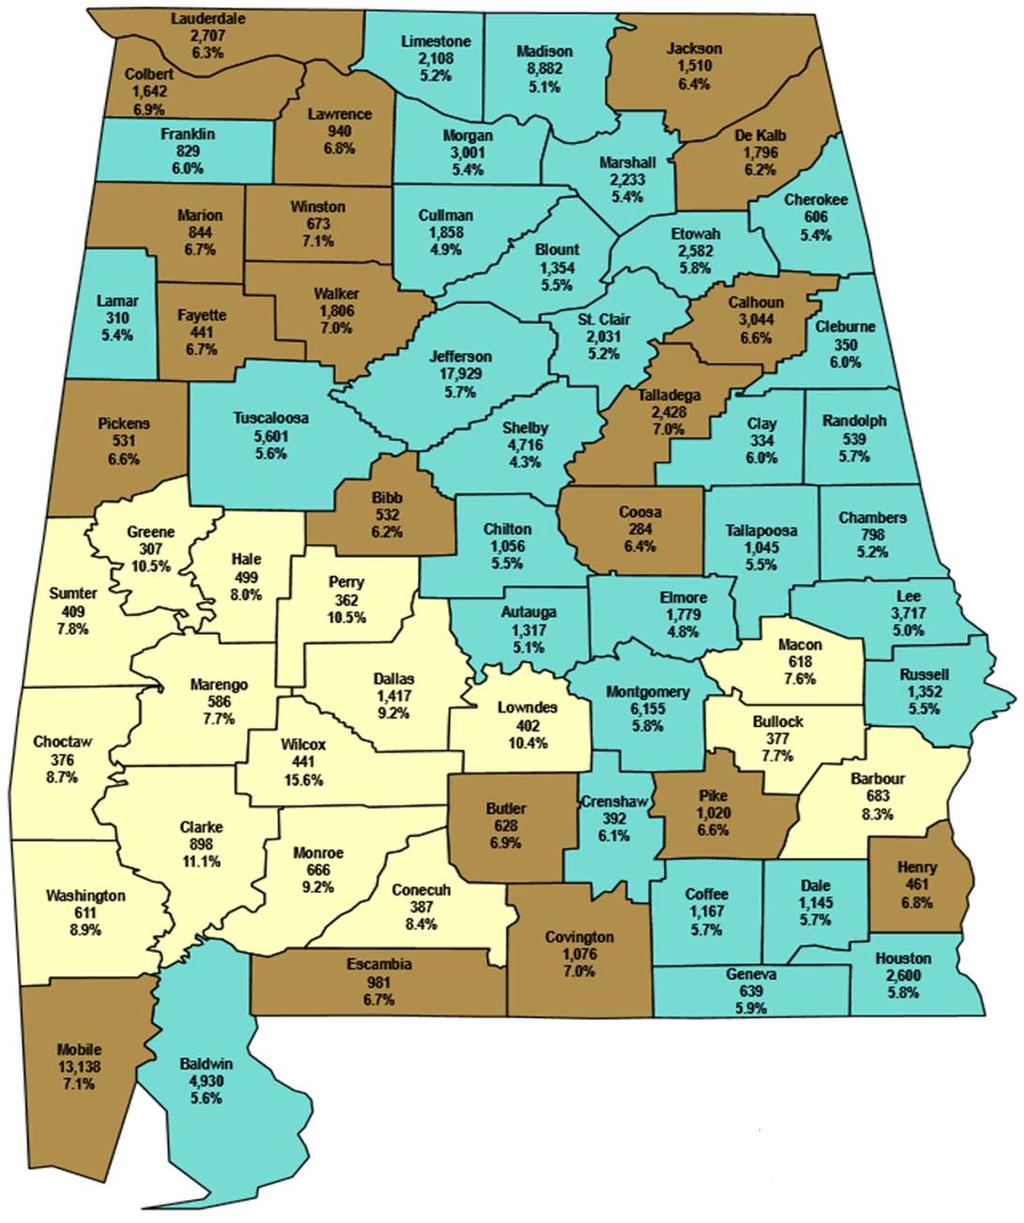 6.6% Alabama Unemployment Rates December 2016 State Ave 5.9% Unemployment Rate 6.